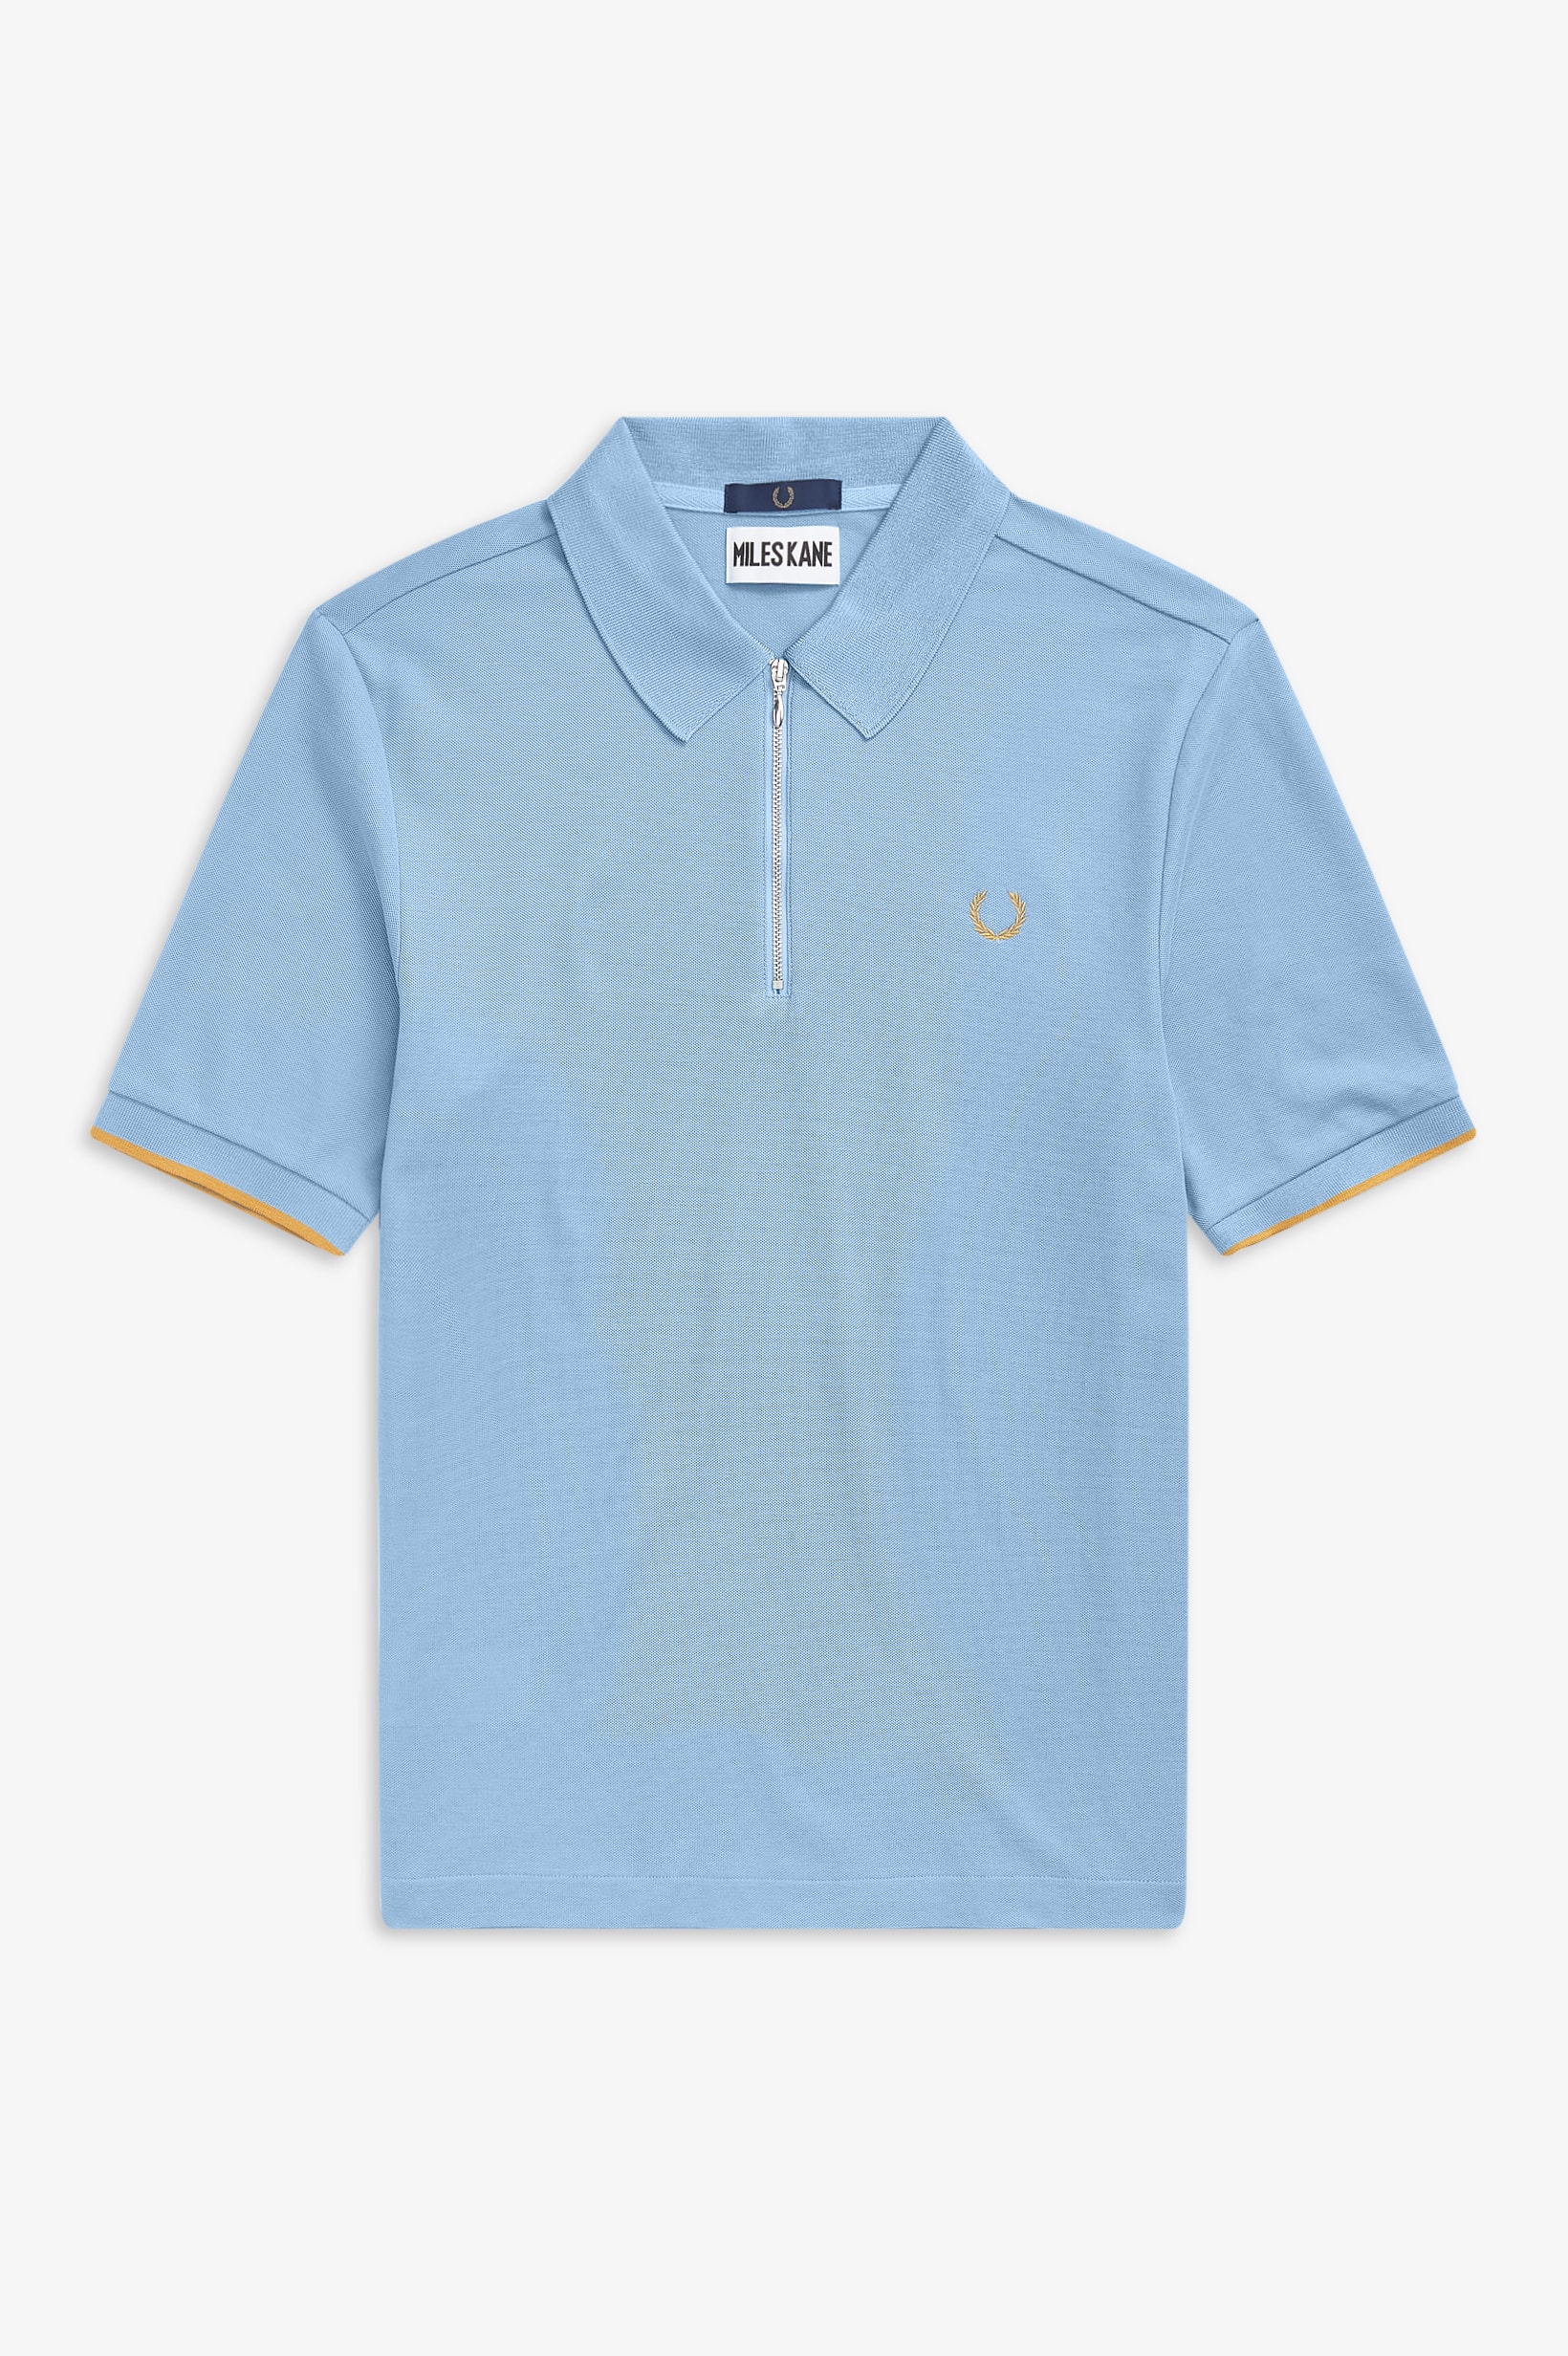 fred-perry-miles-kane-19-6